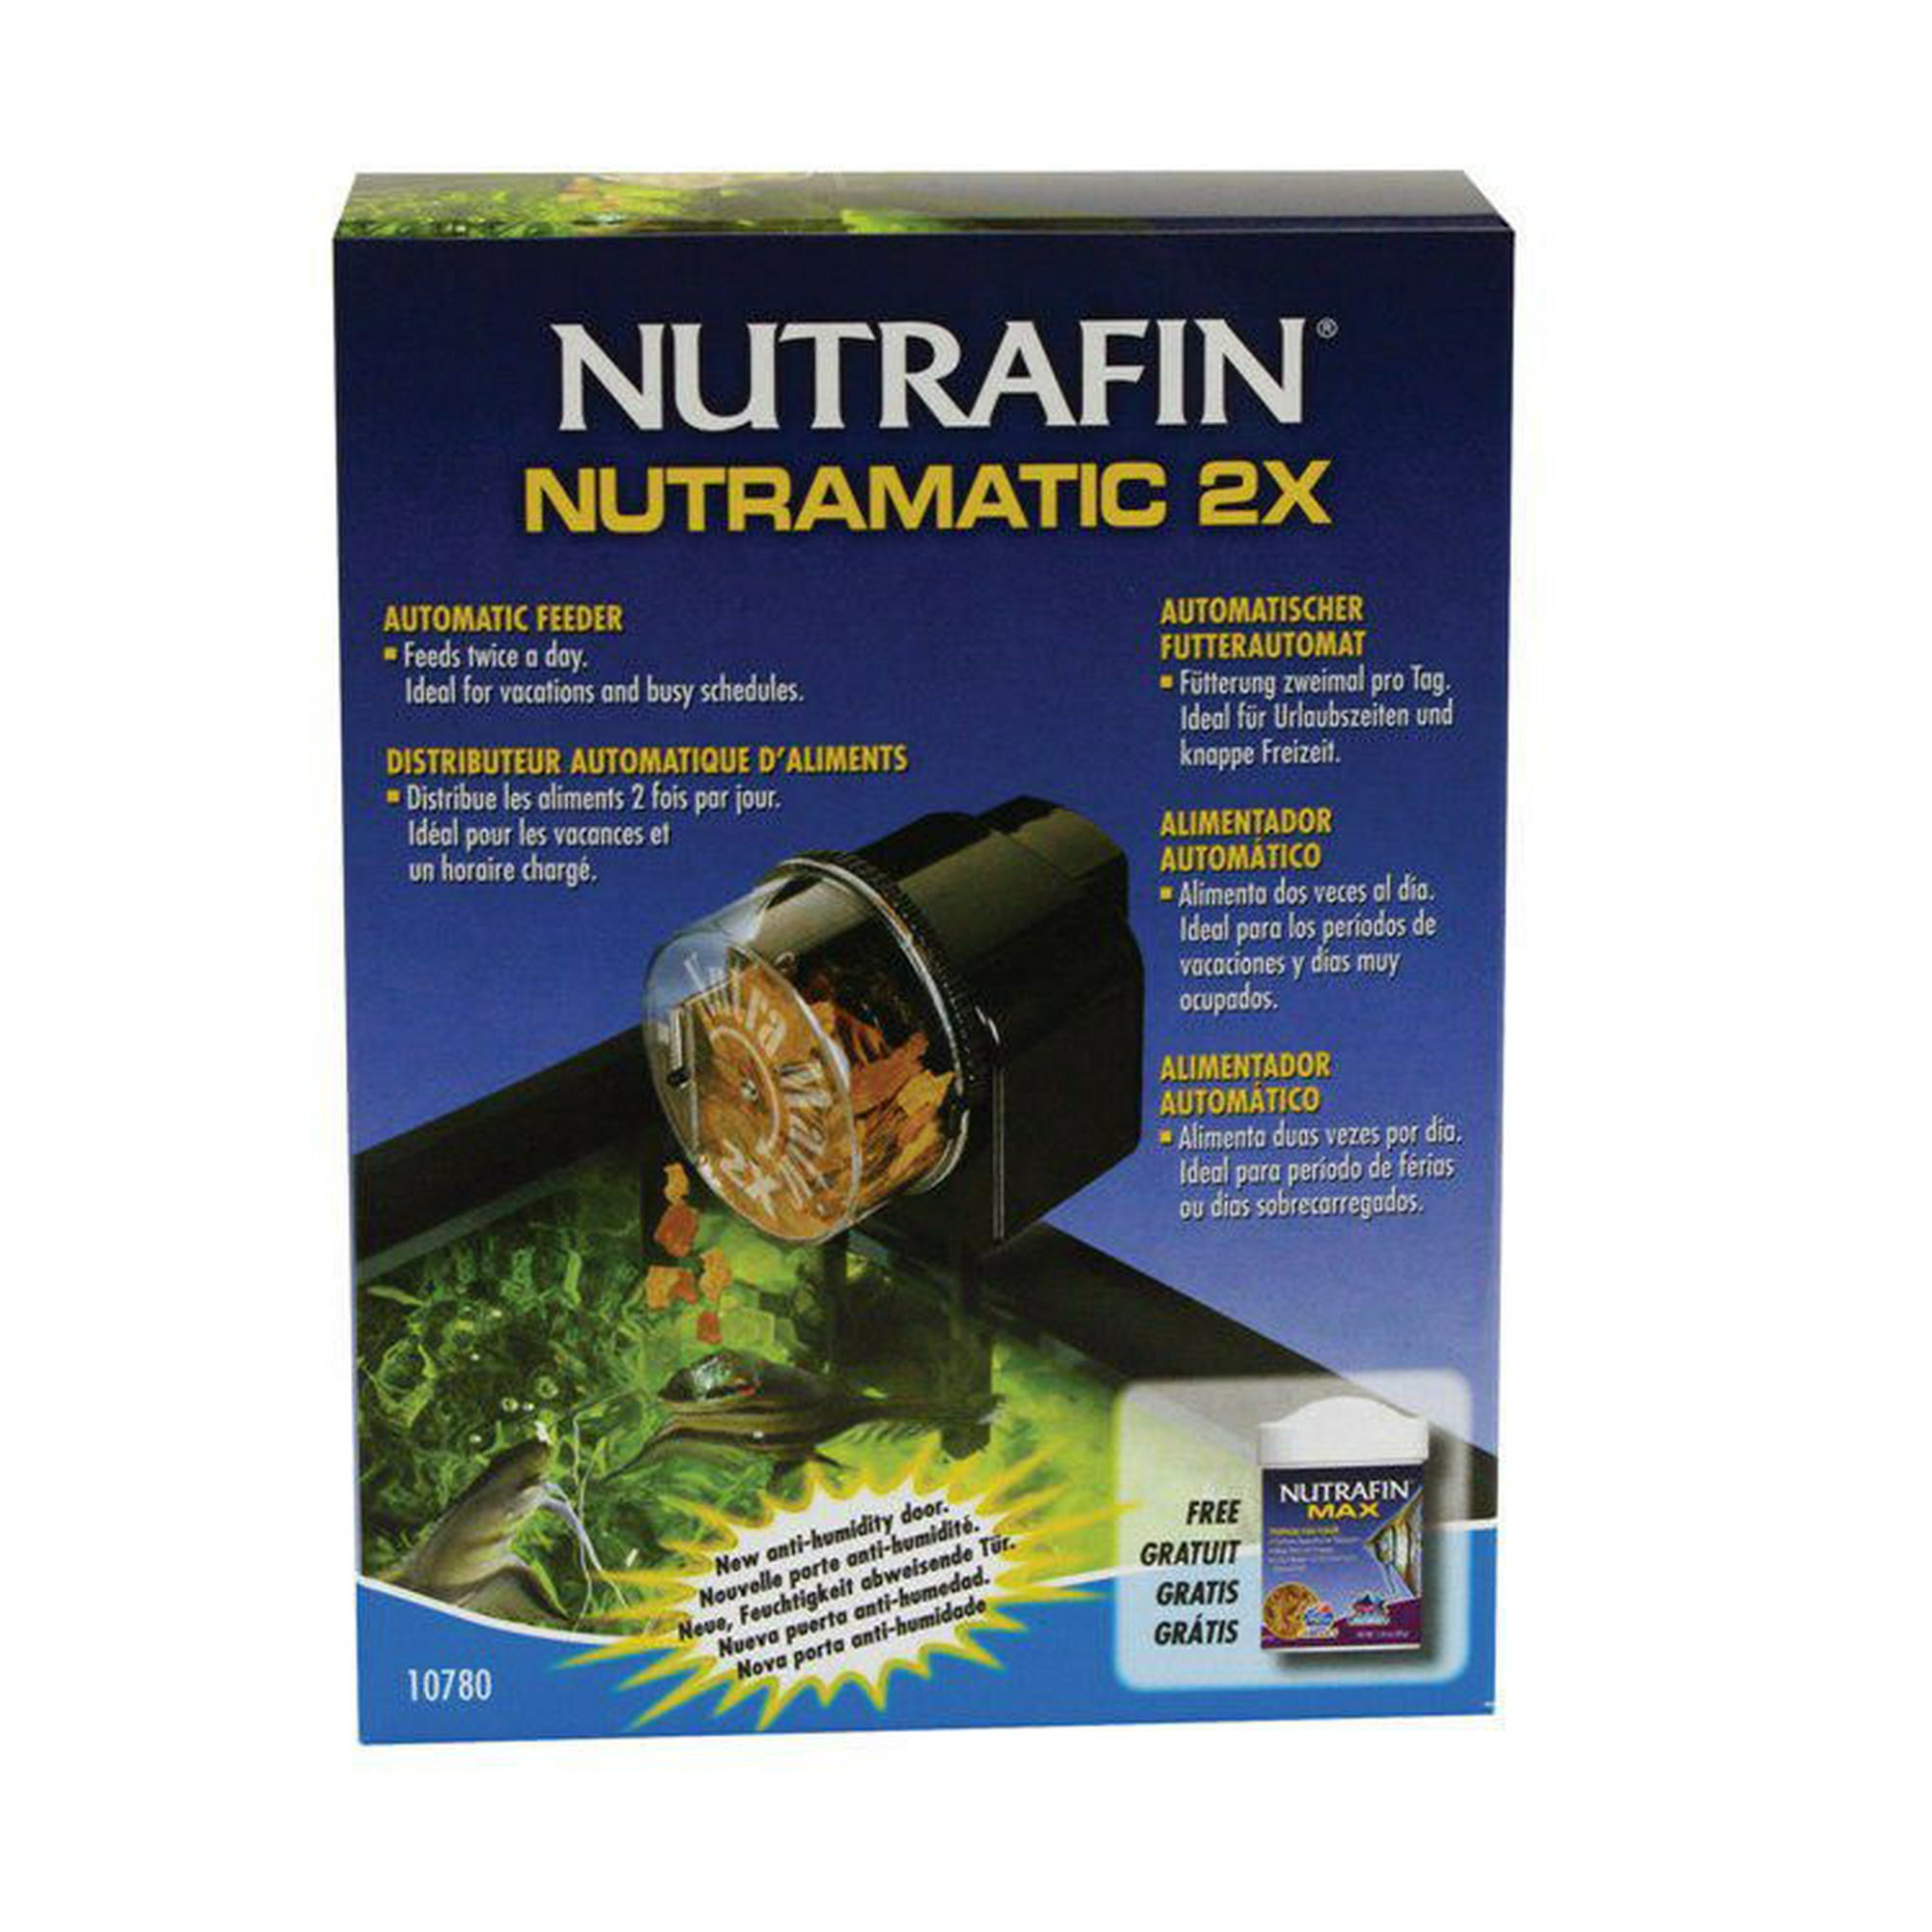 Nutrafin Nutramatic 2X Automatic Fish Food Feeder, Battery operated 